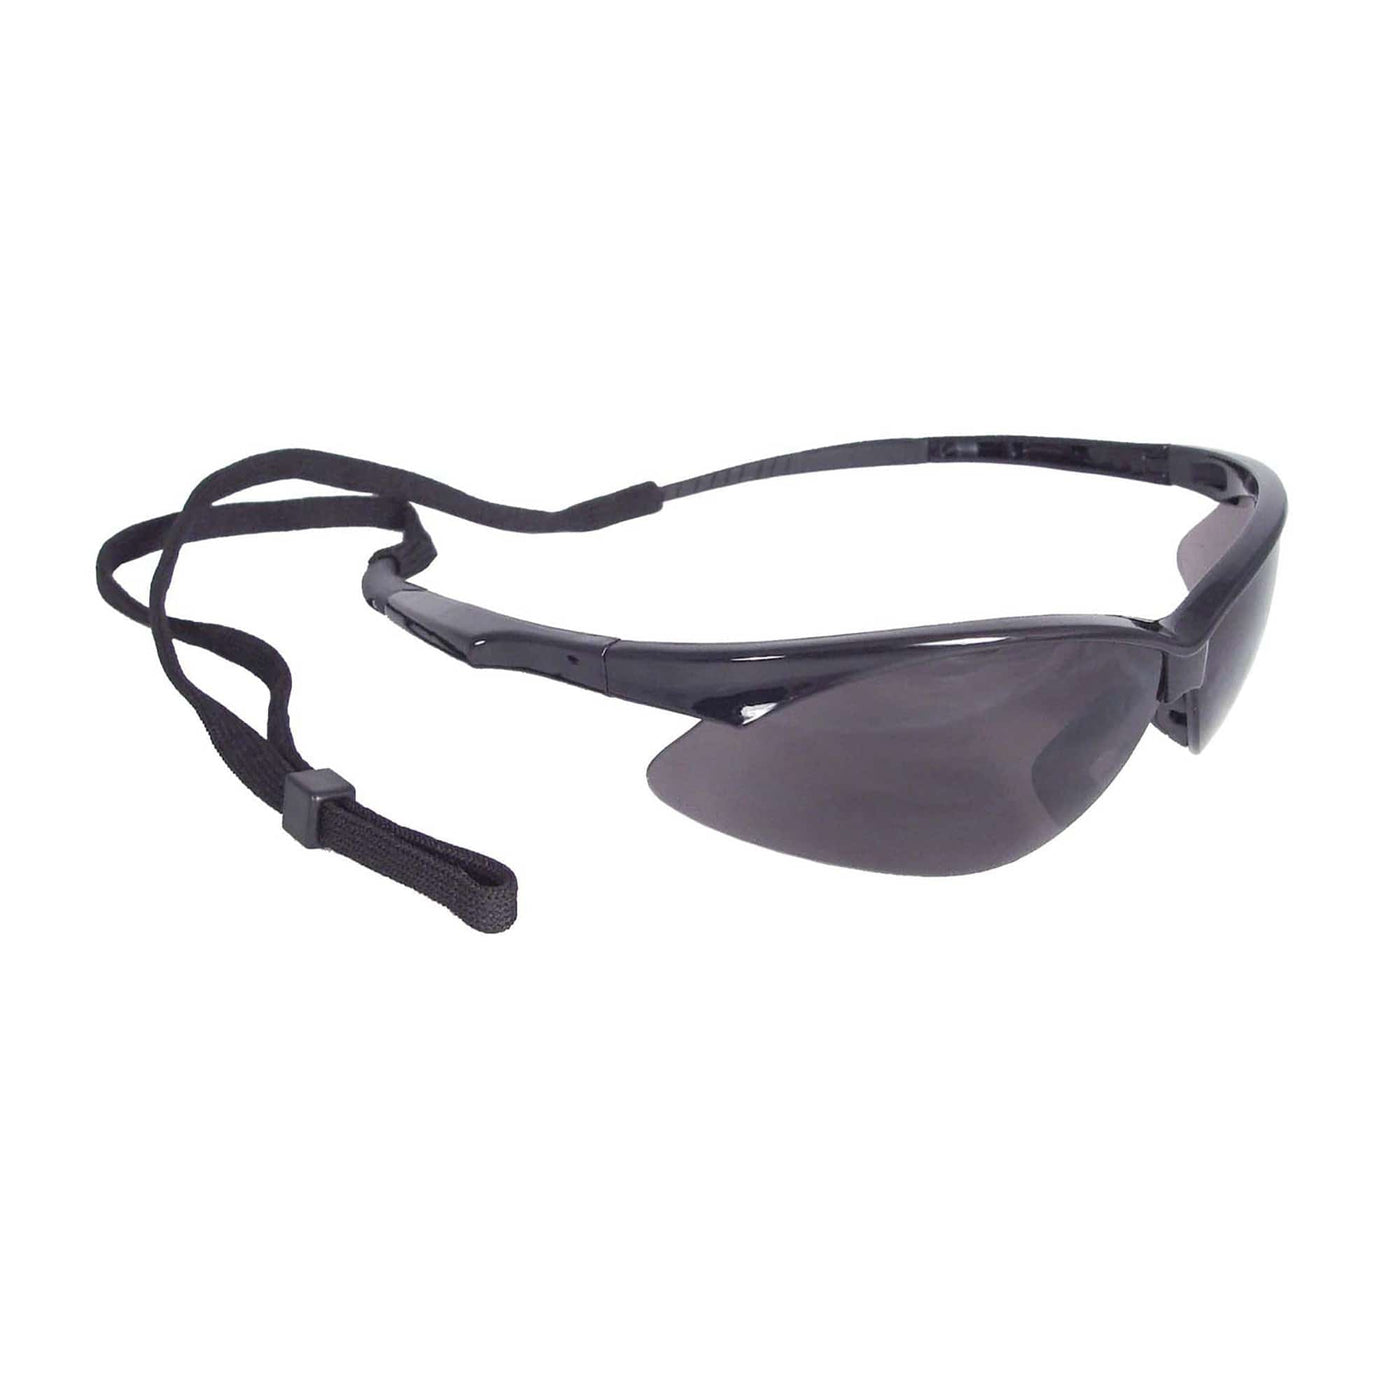 Radians Radians Outback Glasses Smoke Safety/Protection